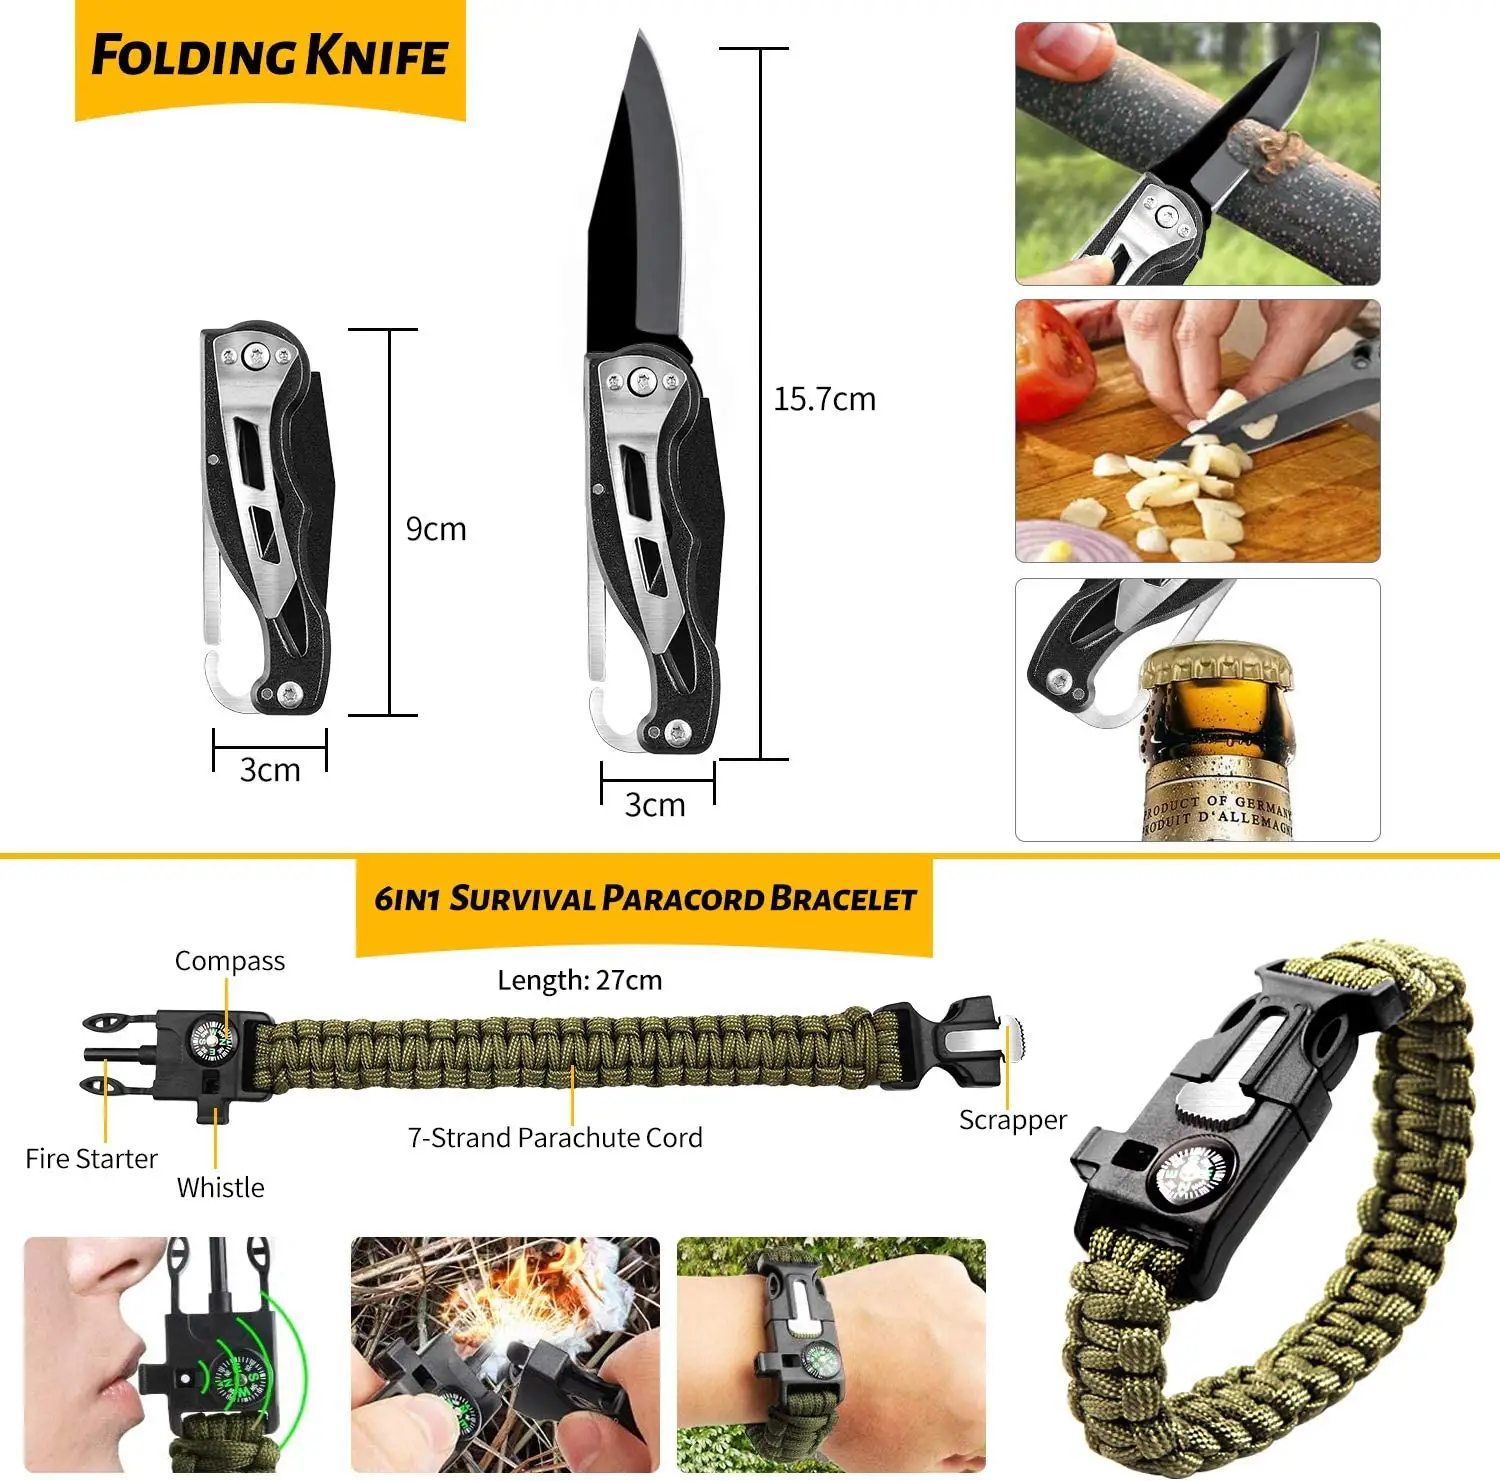 Outdoor Survival Kit 60 in 1 Multifunctional Outdoor Kit with Folding Knife First Aid Kit Pocket Lamp for Outdoor Activities